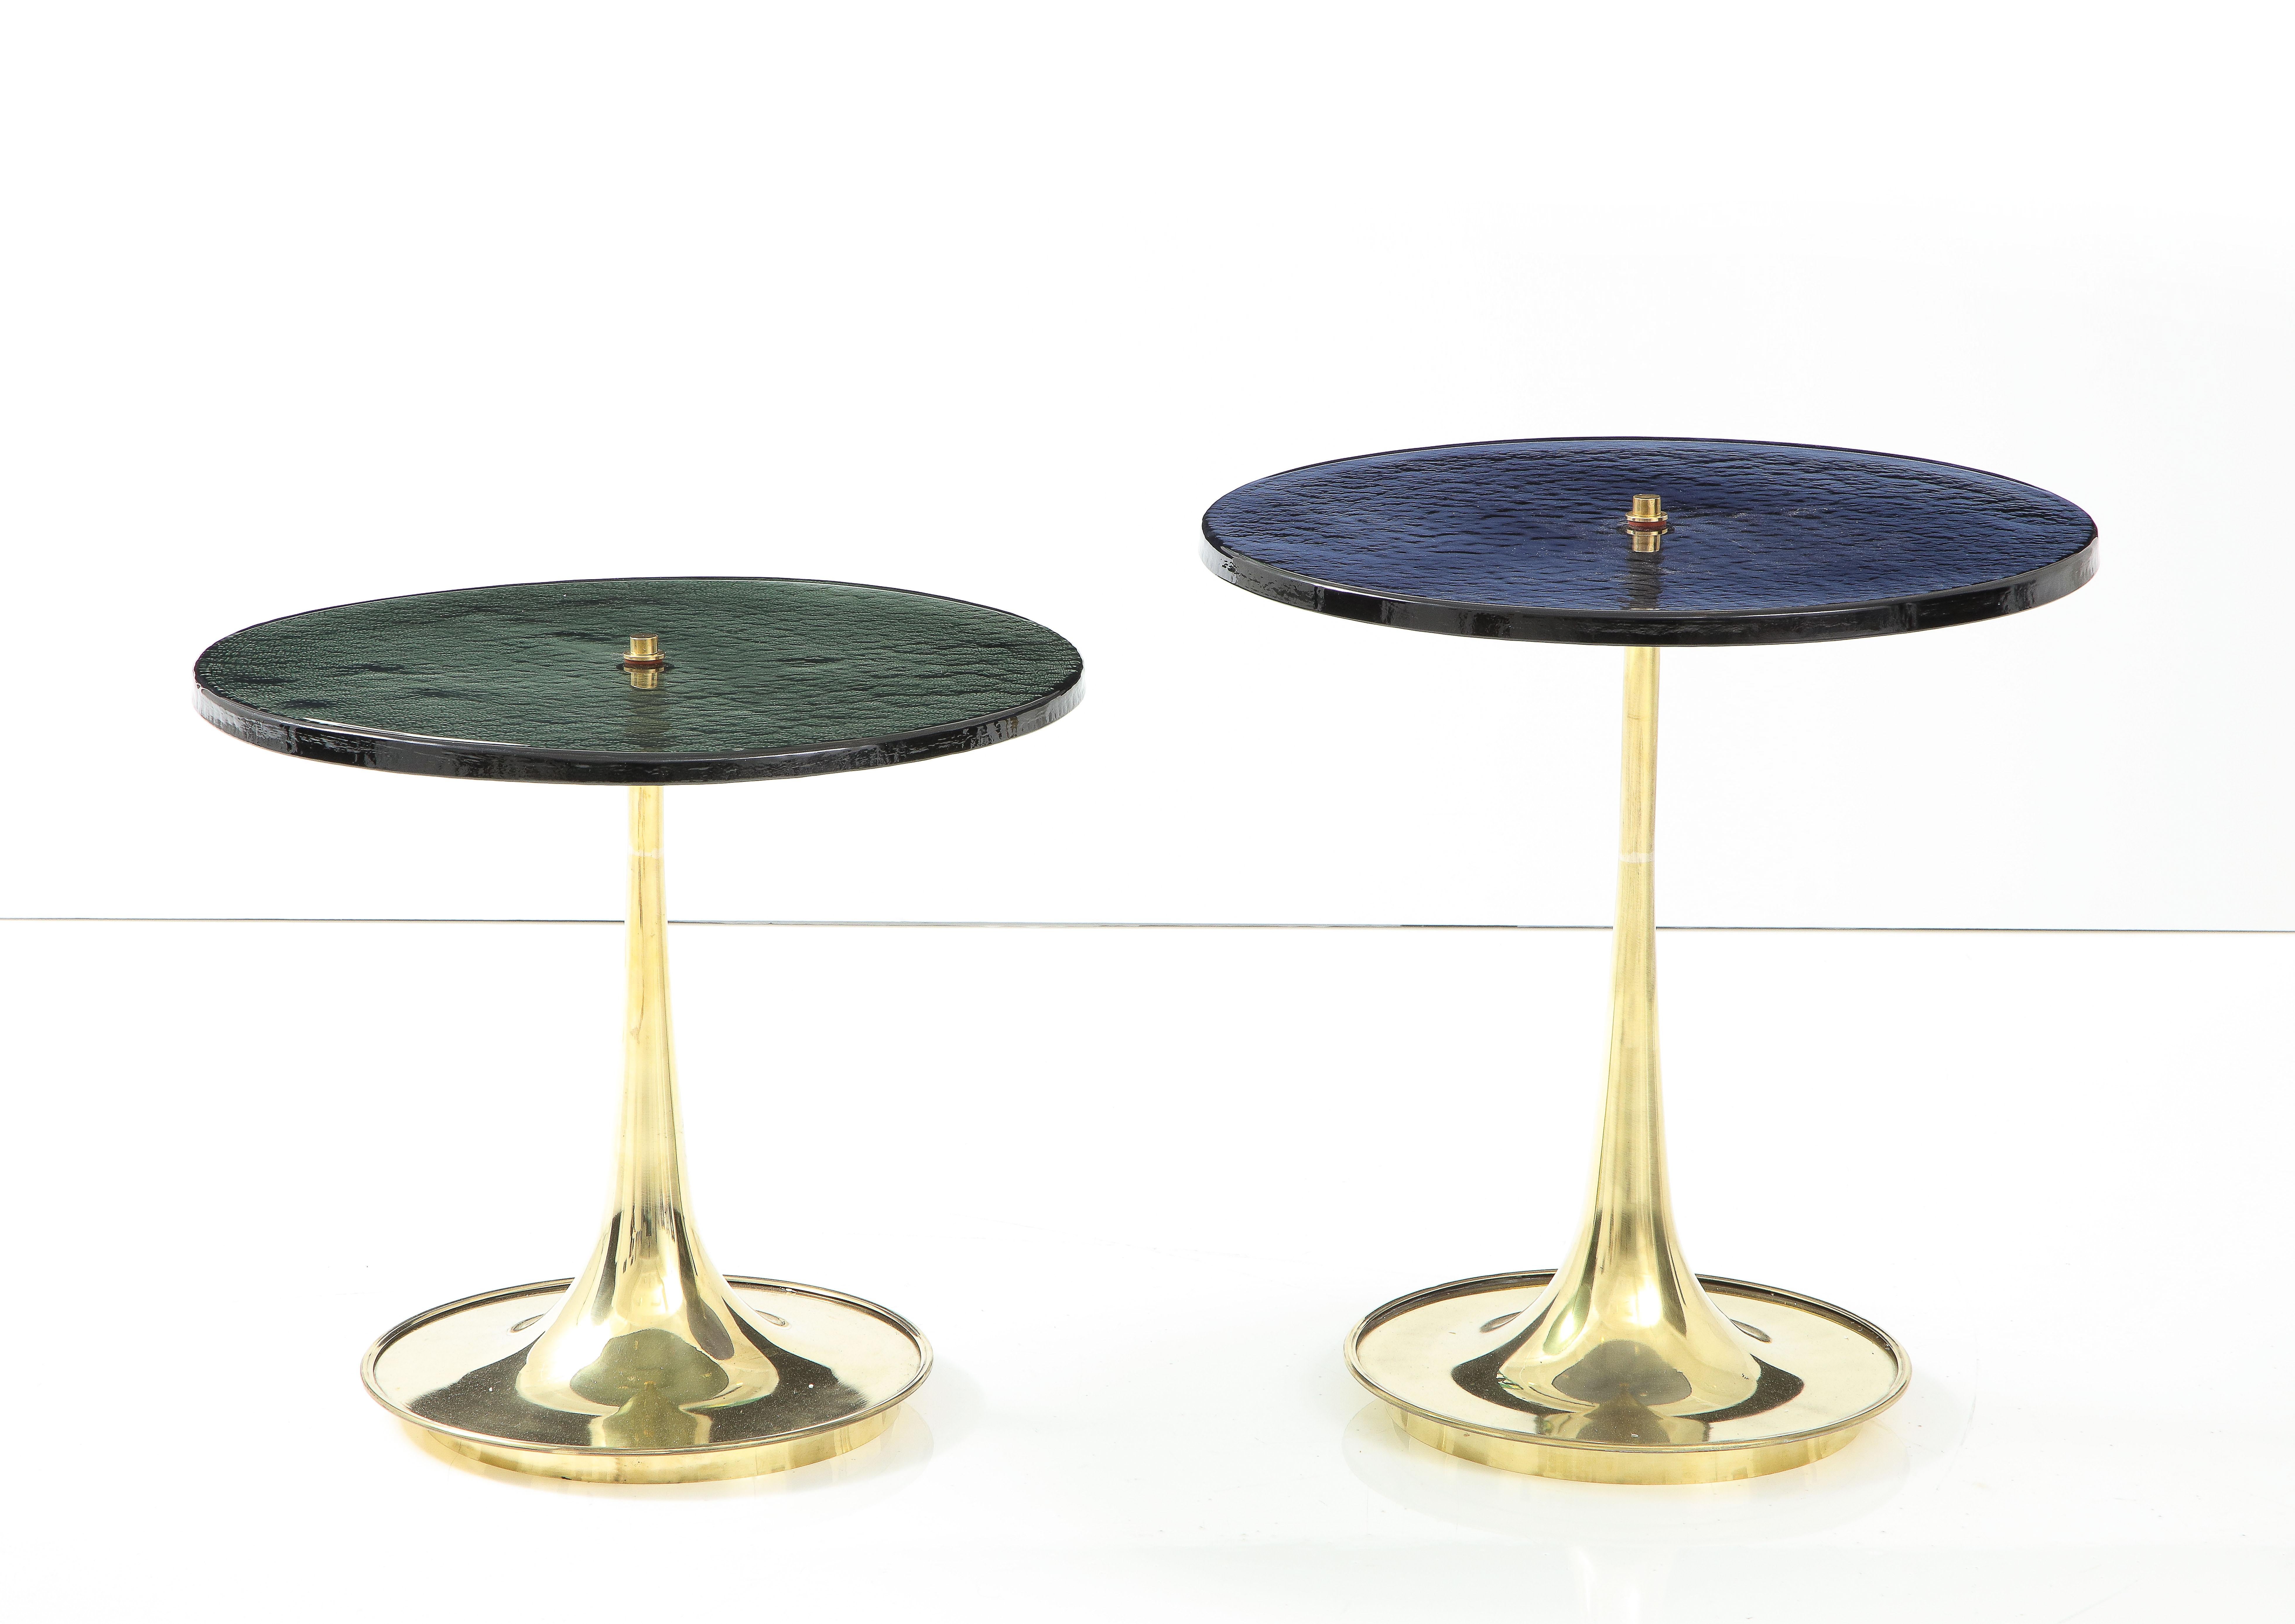 Pair of round cobalt blue and grey taupe Murano glass and brass martini or side tables, Italy, 2022. Hand-casted 1 inch thick, solid cobalt blue (tall table) and grey taupe (short table) colored Murano round glass tops sit atop hand -turned